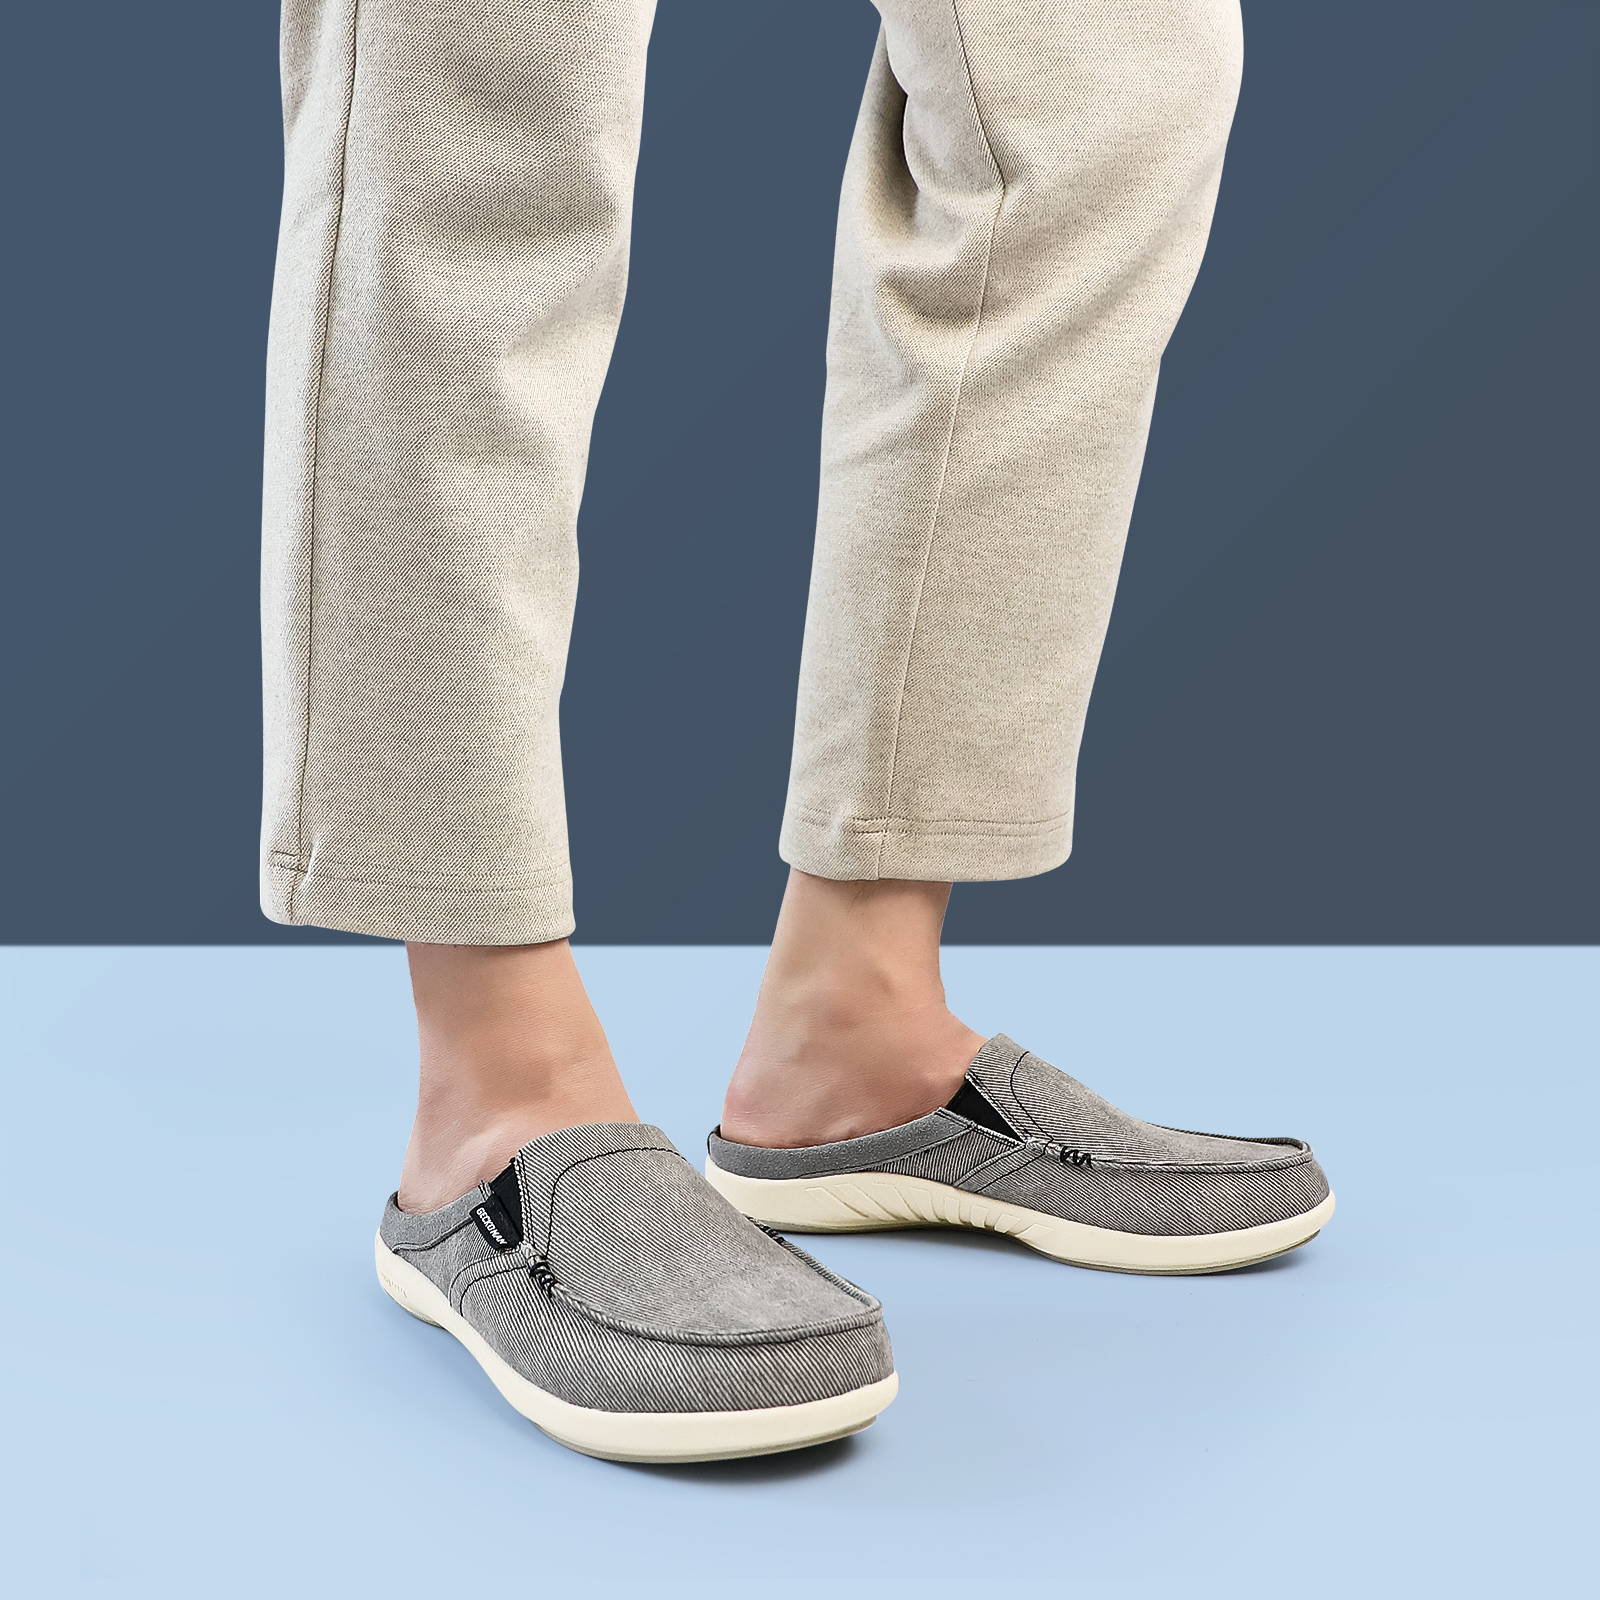 Arch support slippers